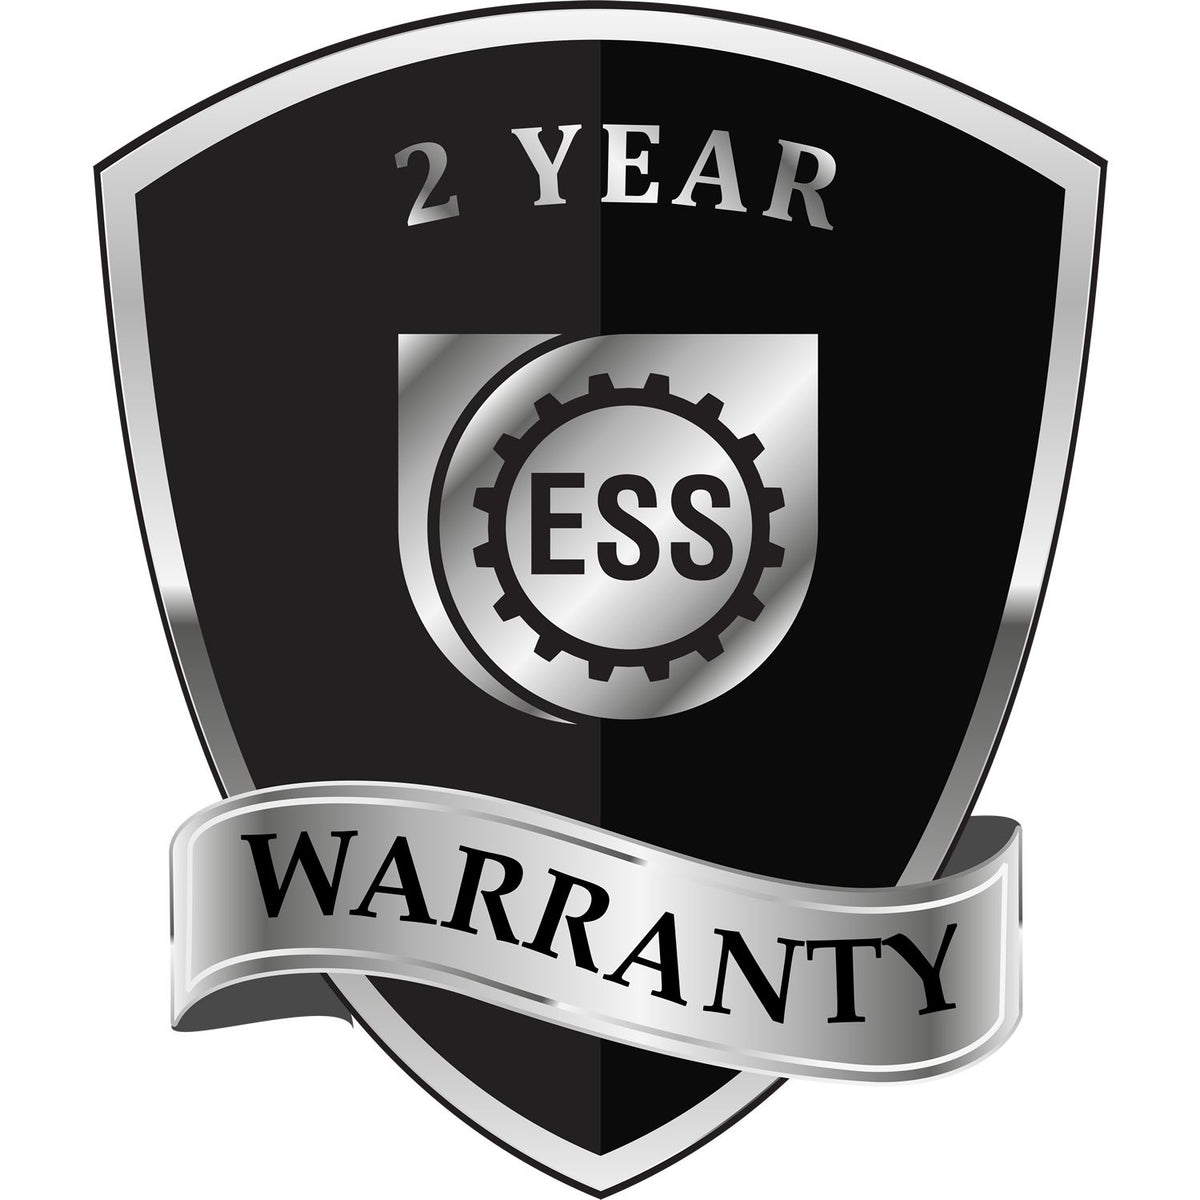 A black and silver badge or emblem showing warranty information for the Gift Florida Landscape Architect Seal